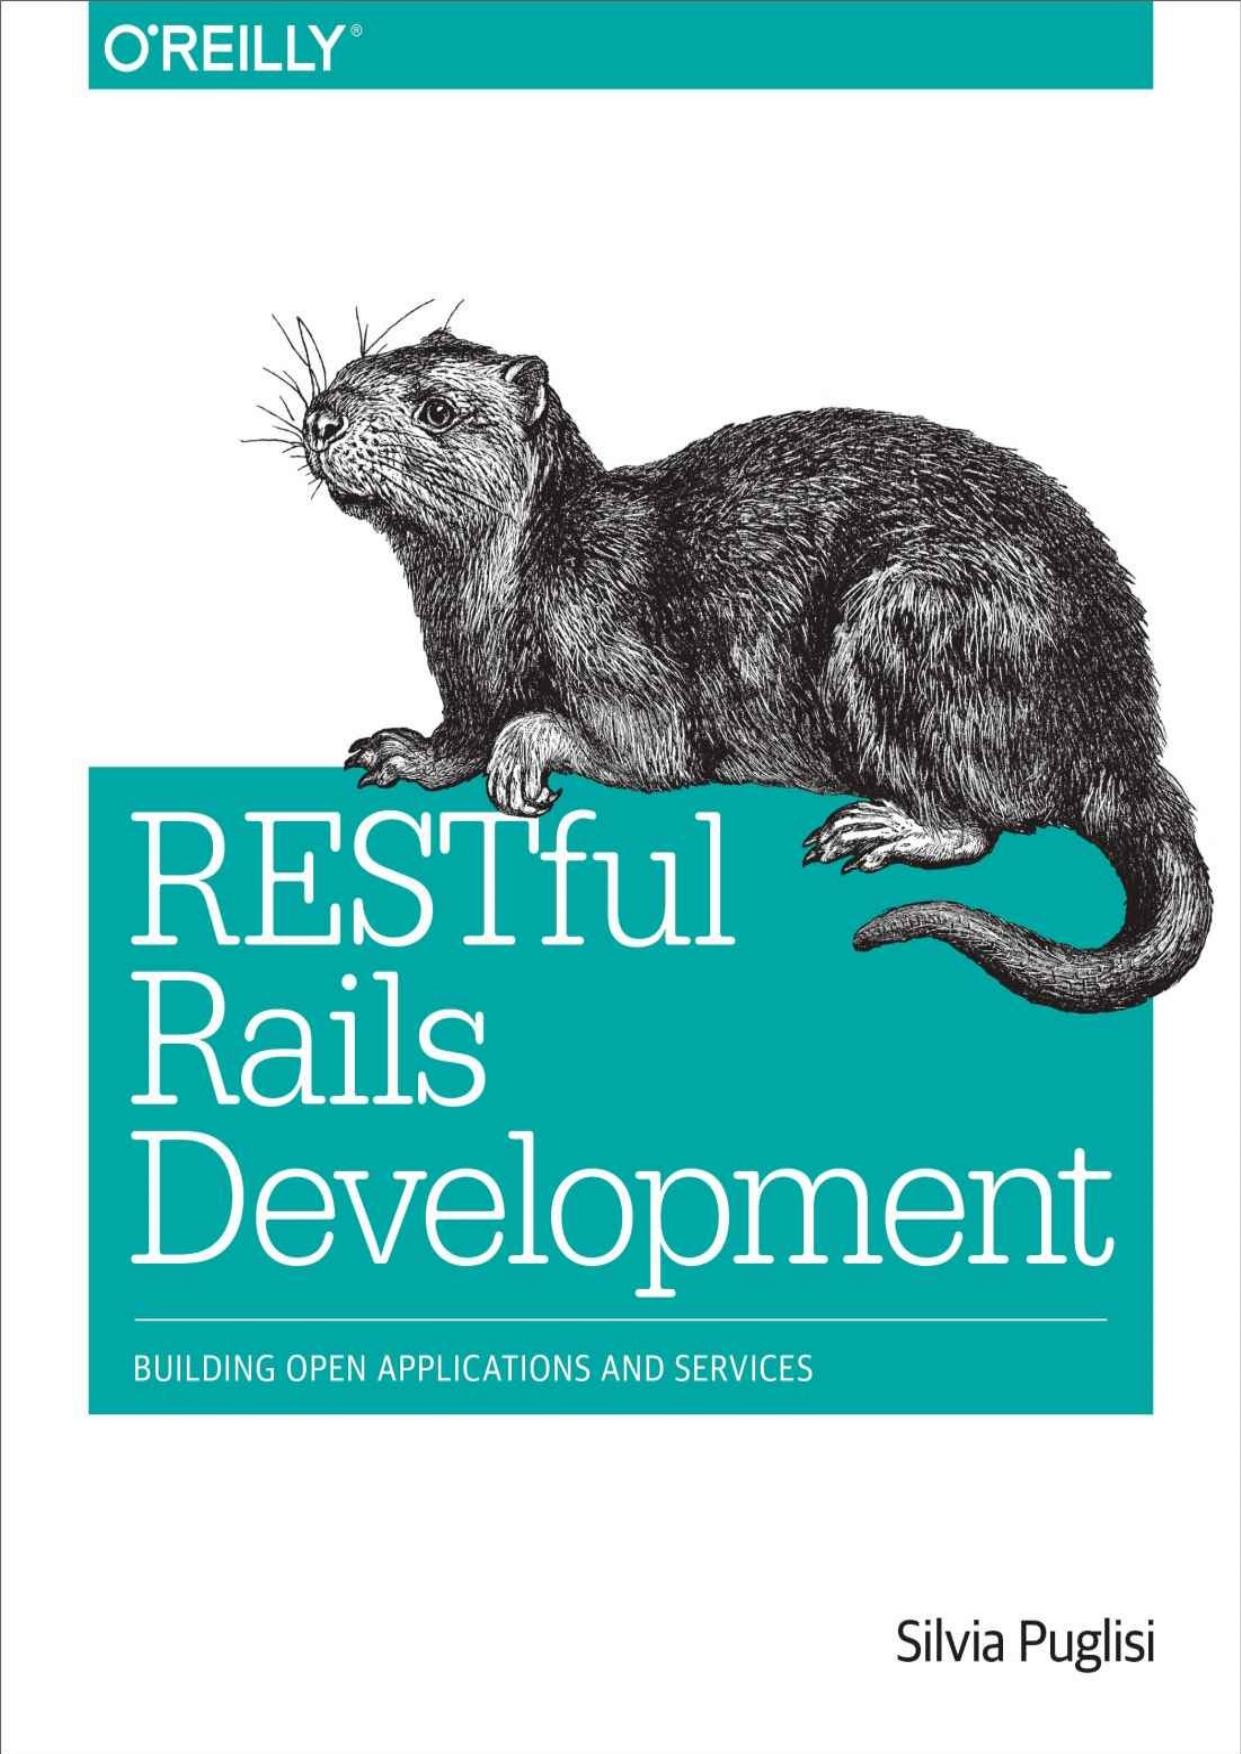 RESTful Rails Development: Building Open Applications and Services by Silvia Puglisi